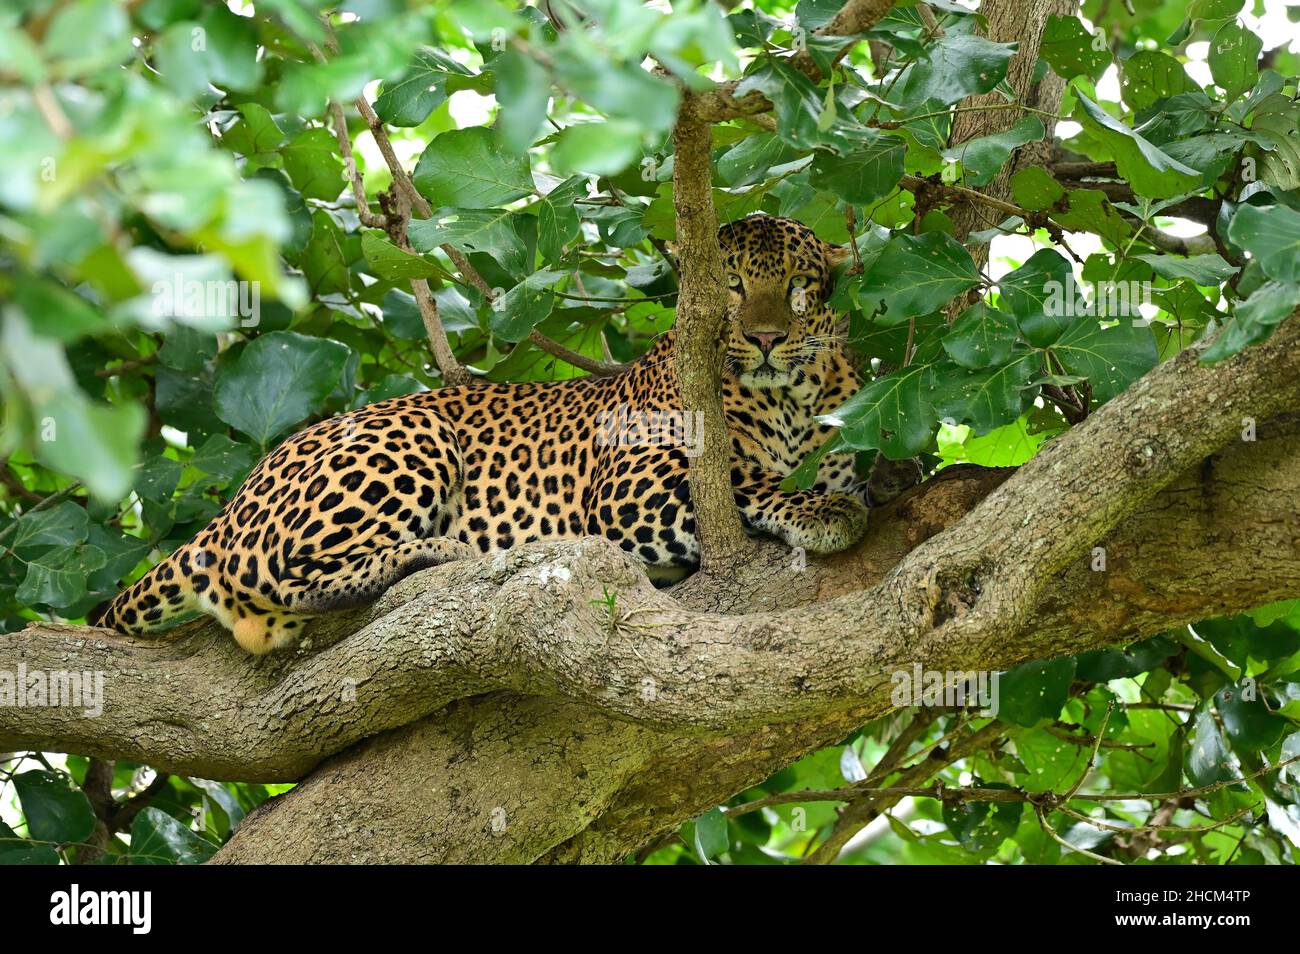 Closeup shot of a leopard on a tree in a jungle Stock Photo